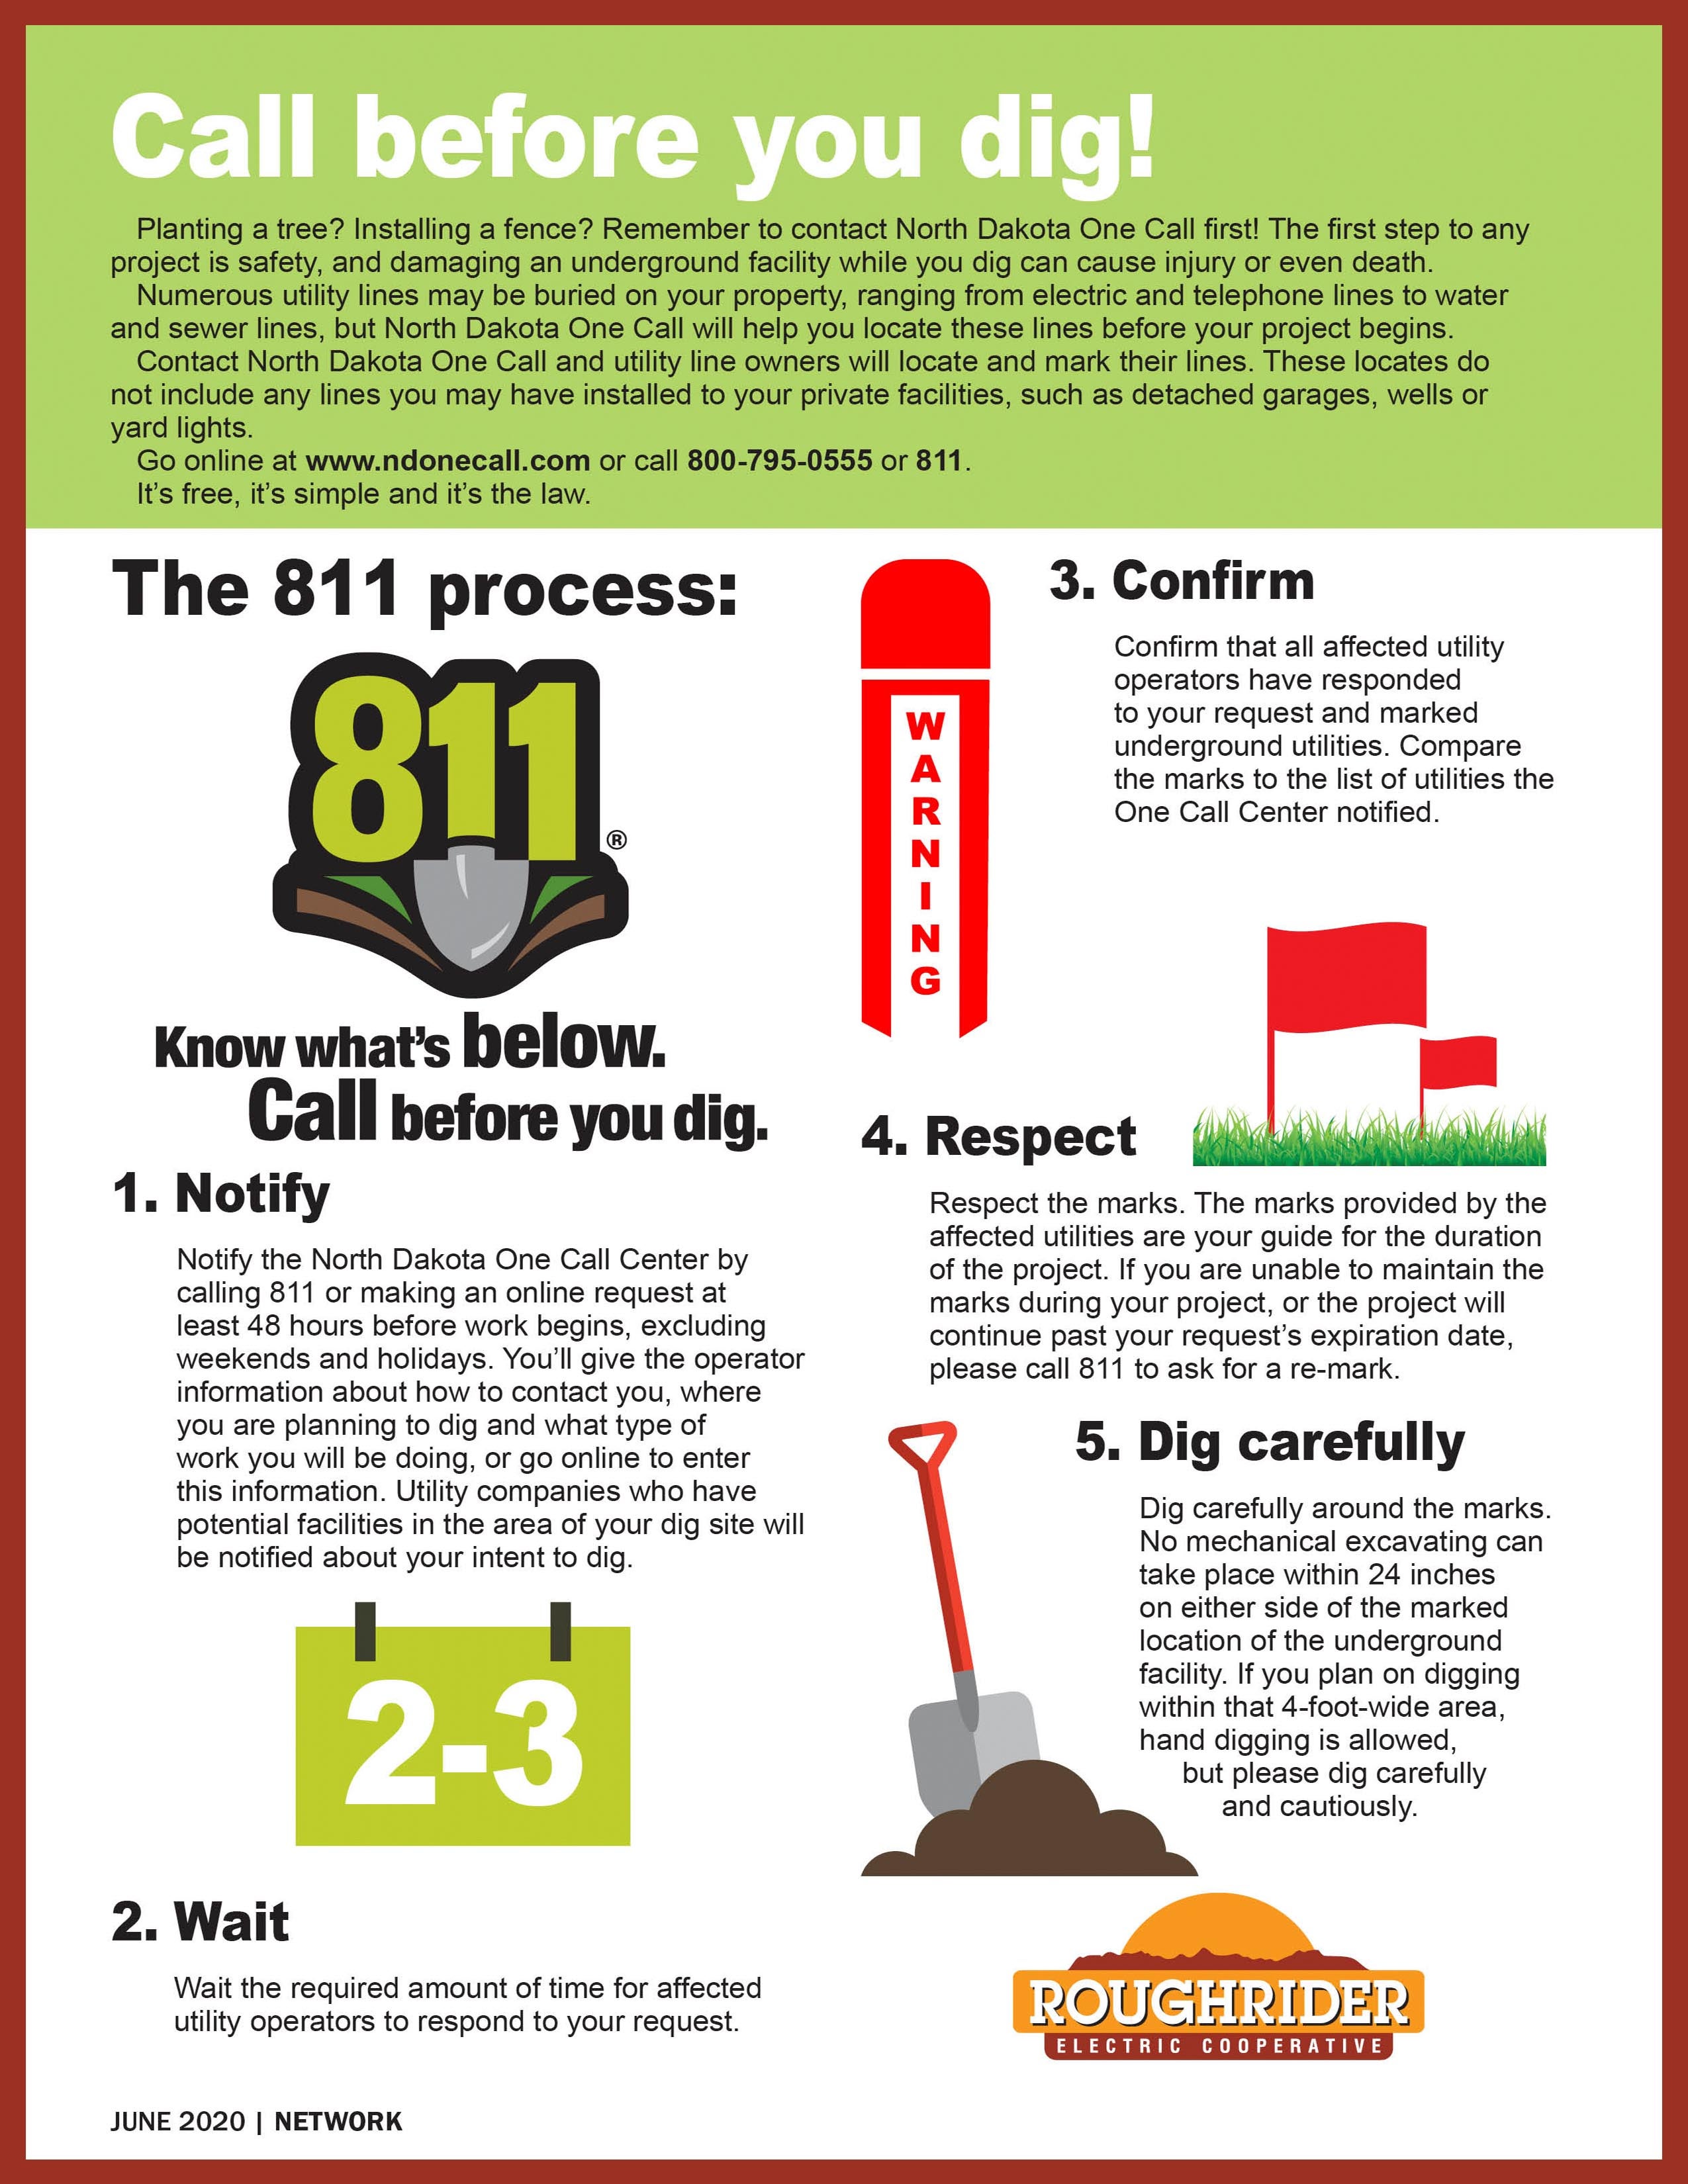 Call Before You Dig Process